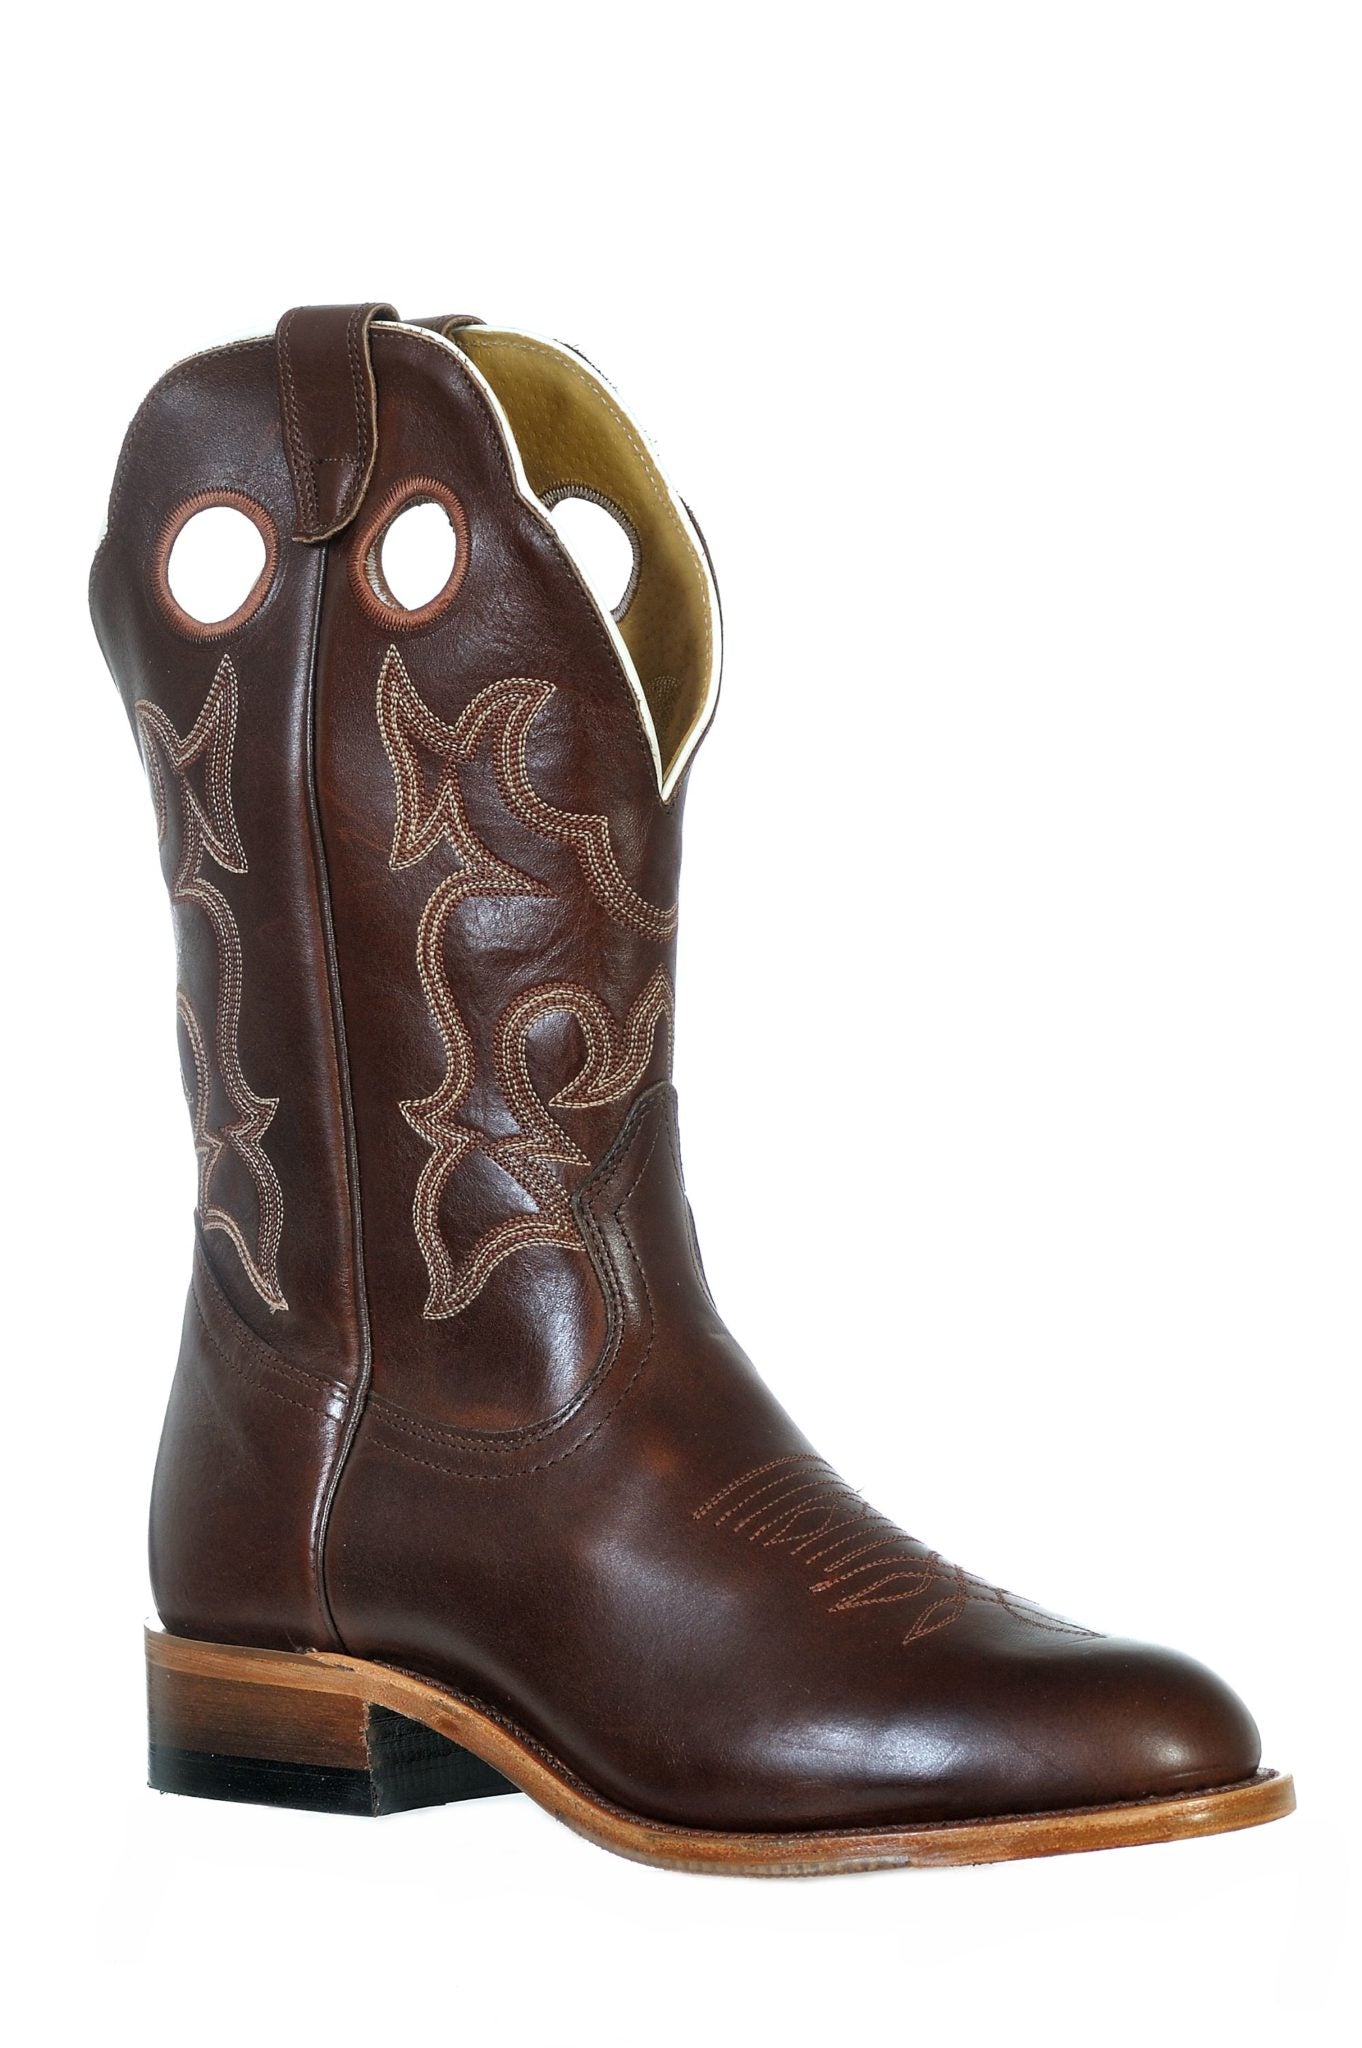 Boulet 9381 Ranch Hand Tan Round Toe